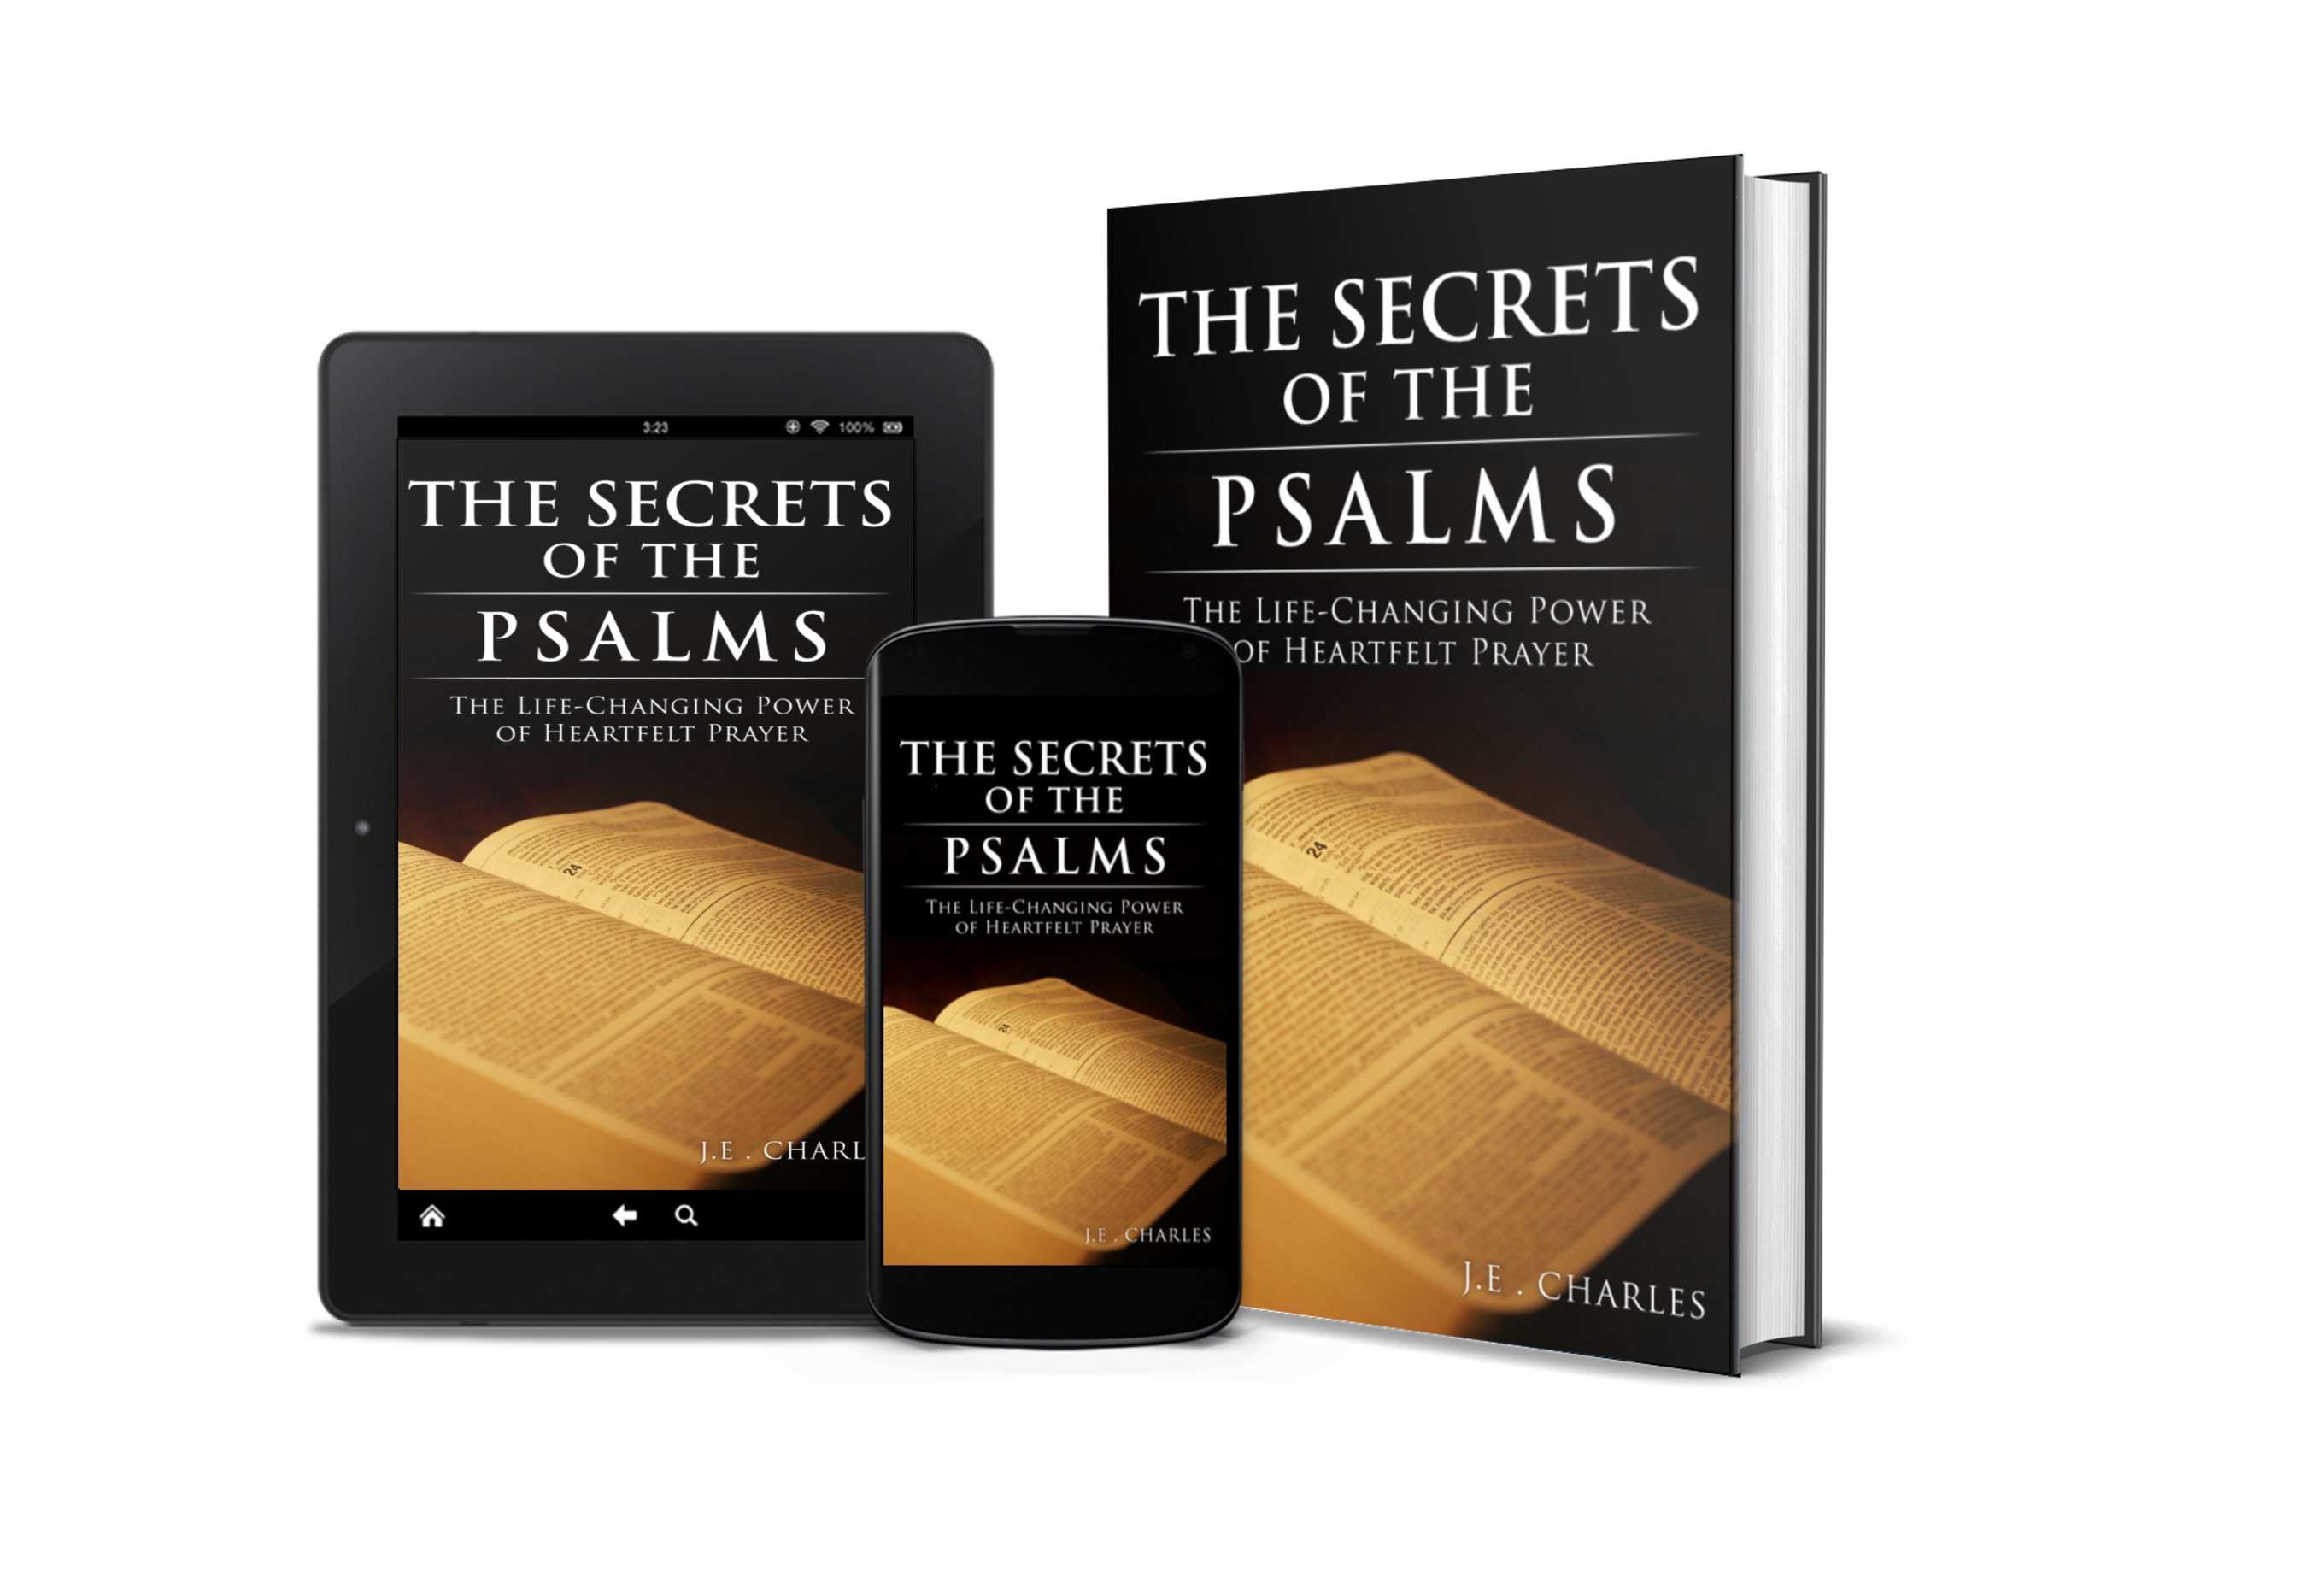 The Secrets of the Psalms: The Life-Changing Power of Heartfelt Prayer